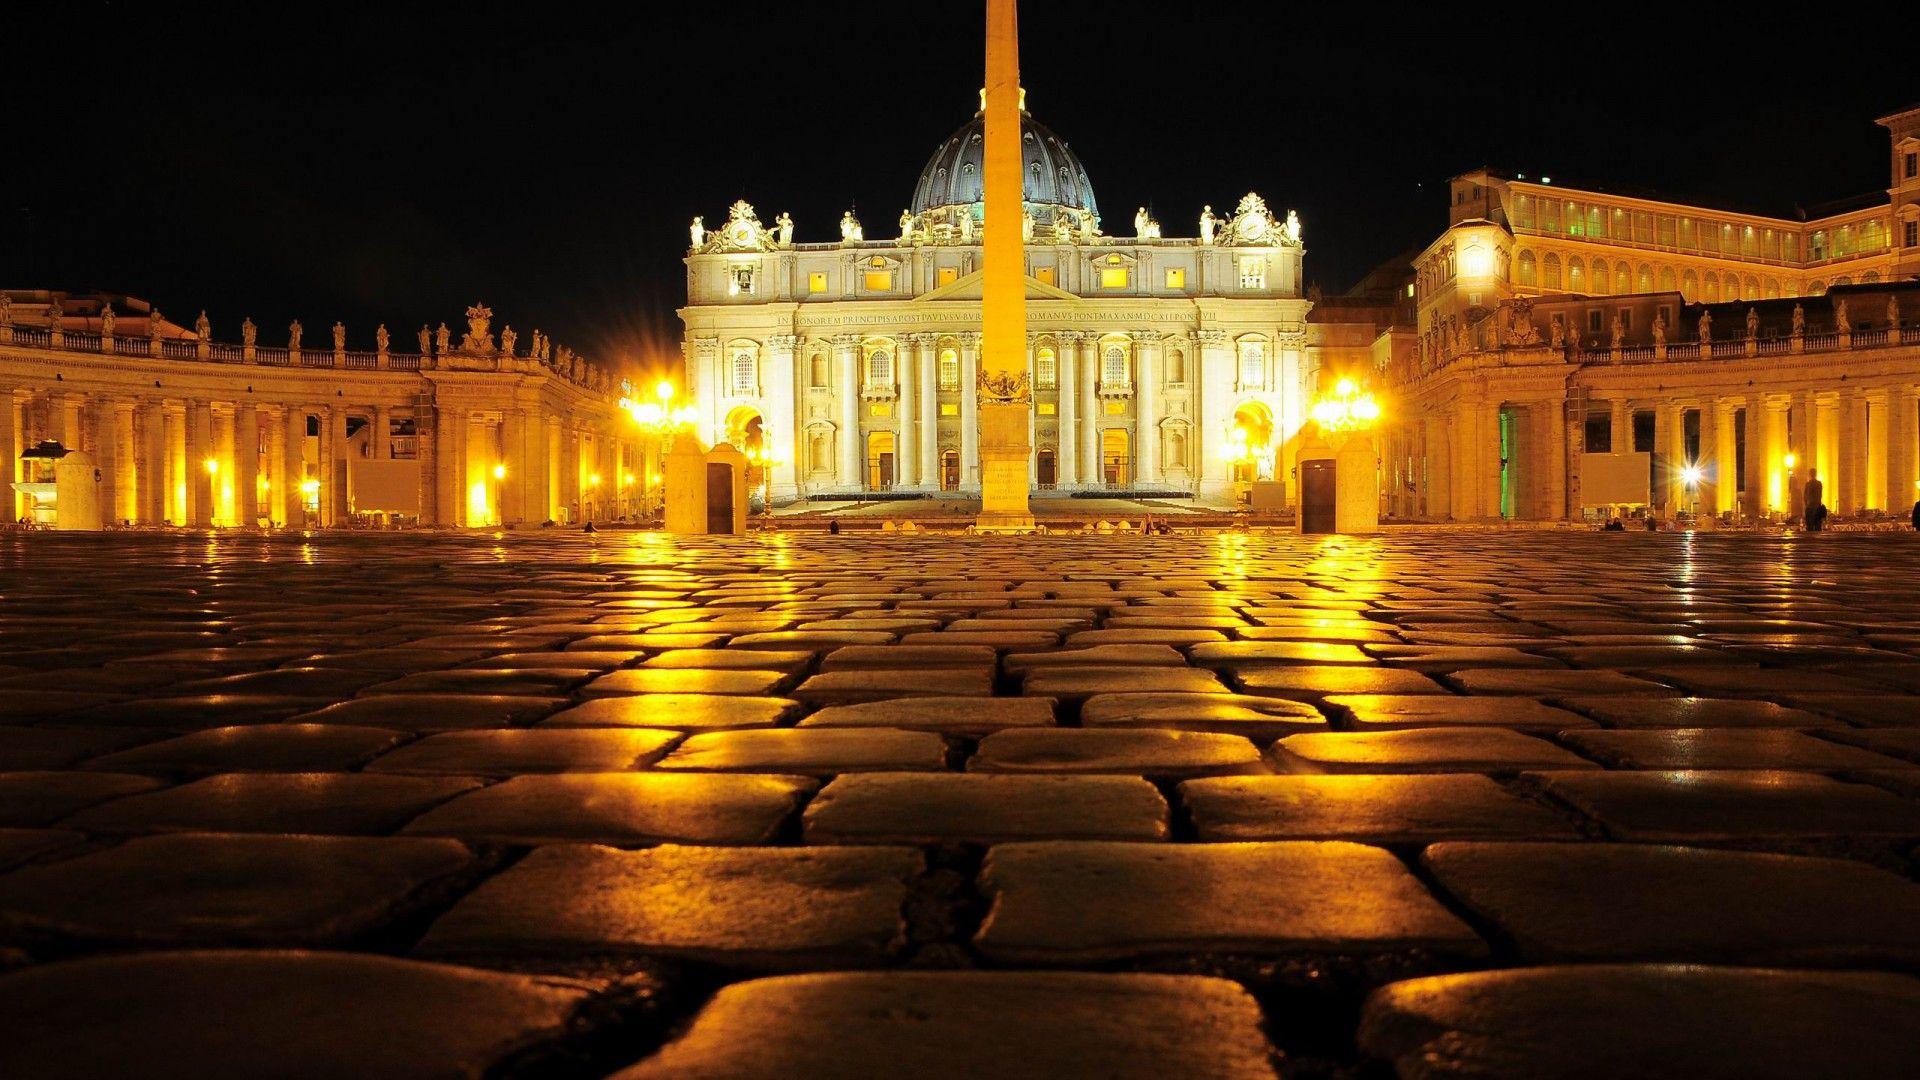 Vatican City Wallpaper. Best Wallpaper. Places I would LOVE to